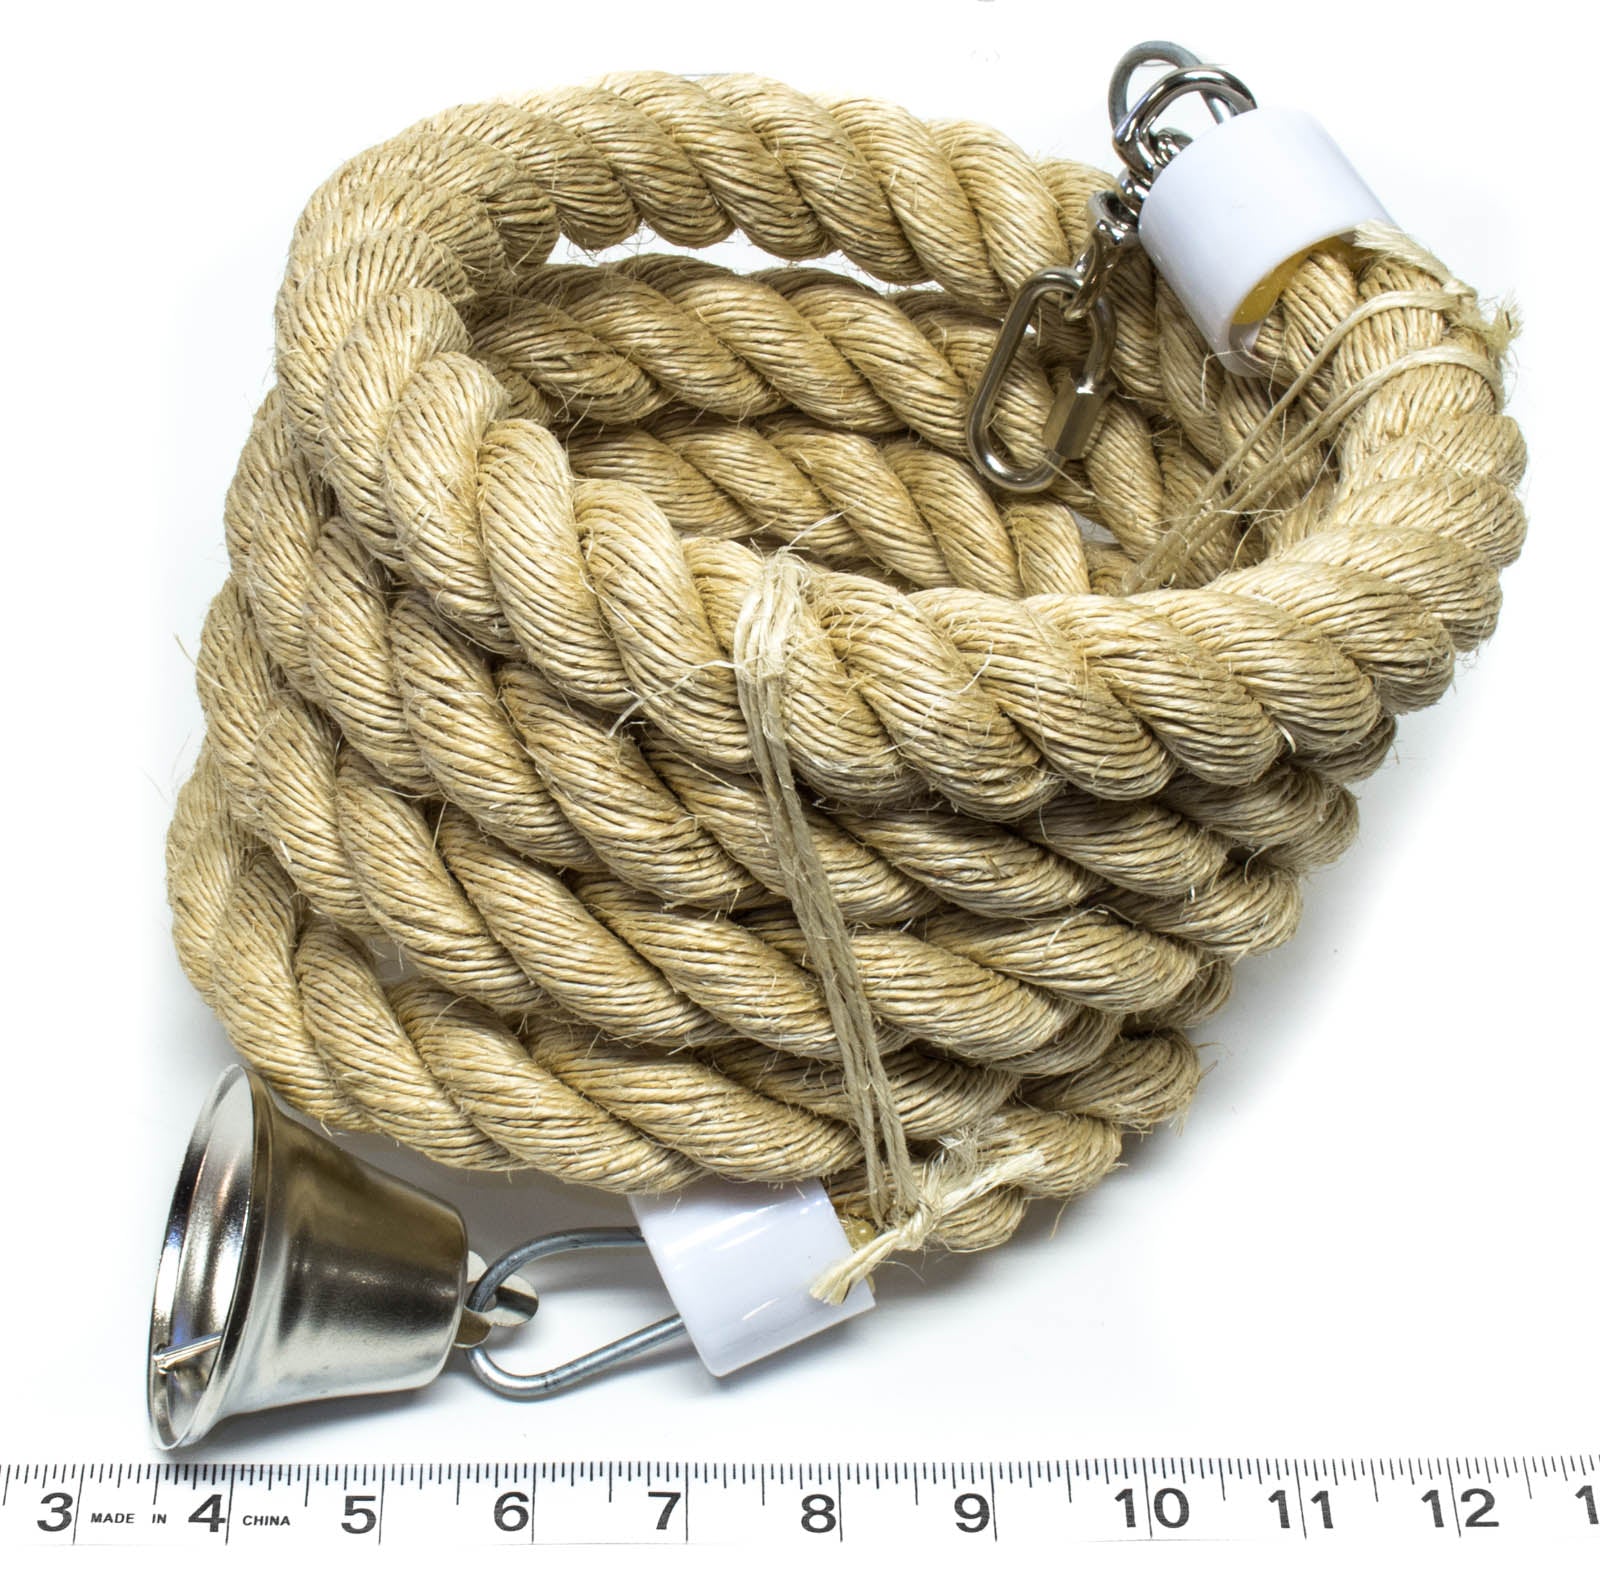 2 Inch Polypropylene Rope Perch - Natural Color